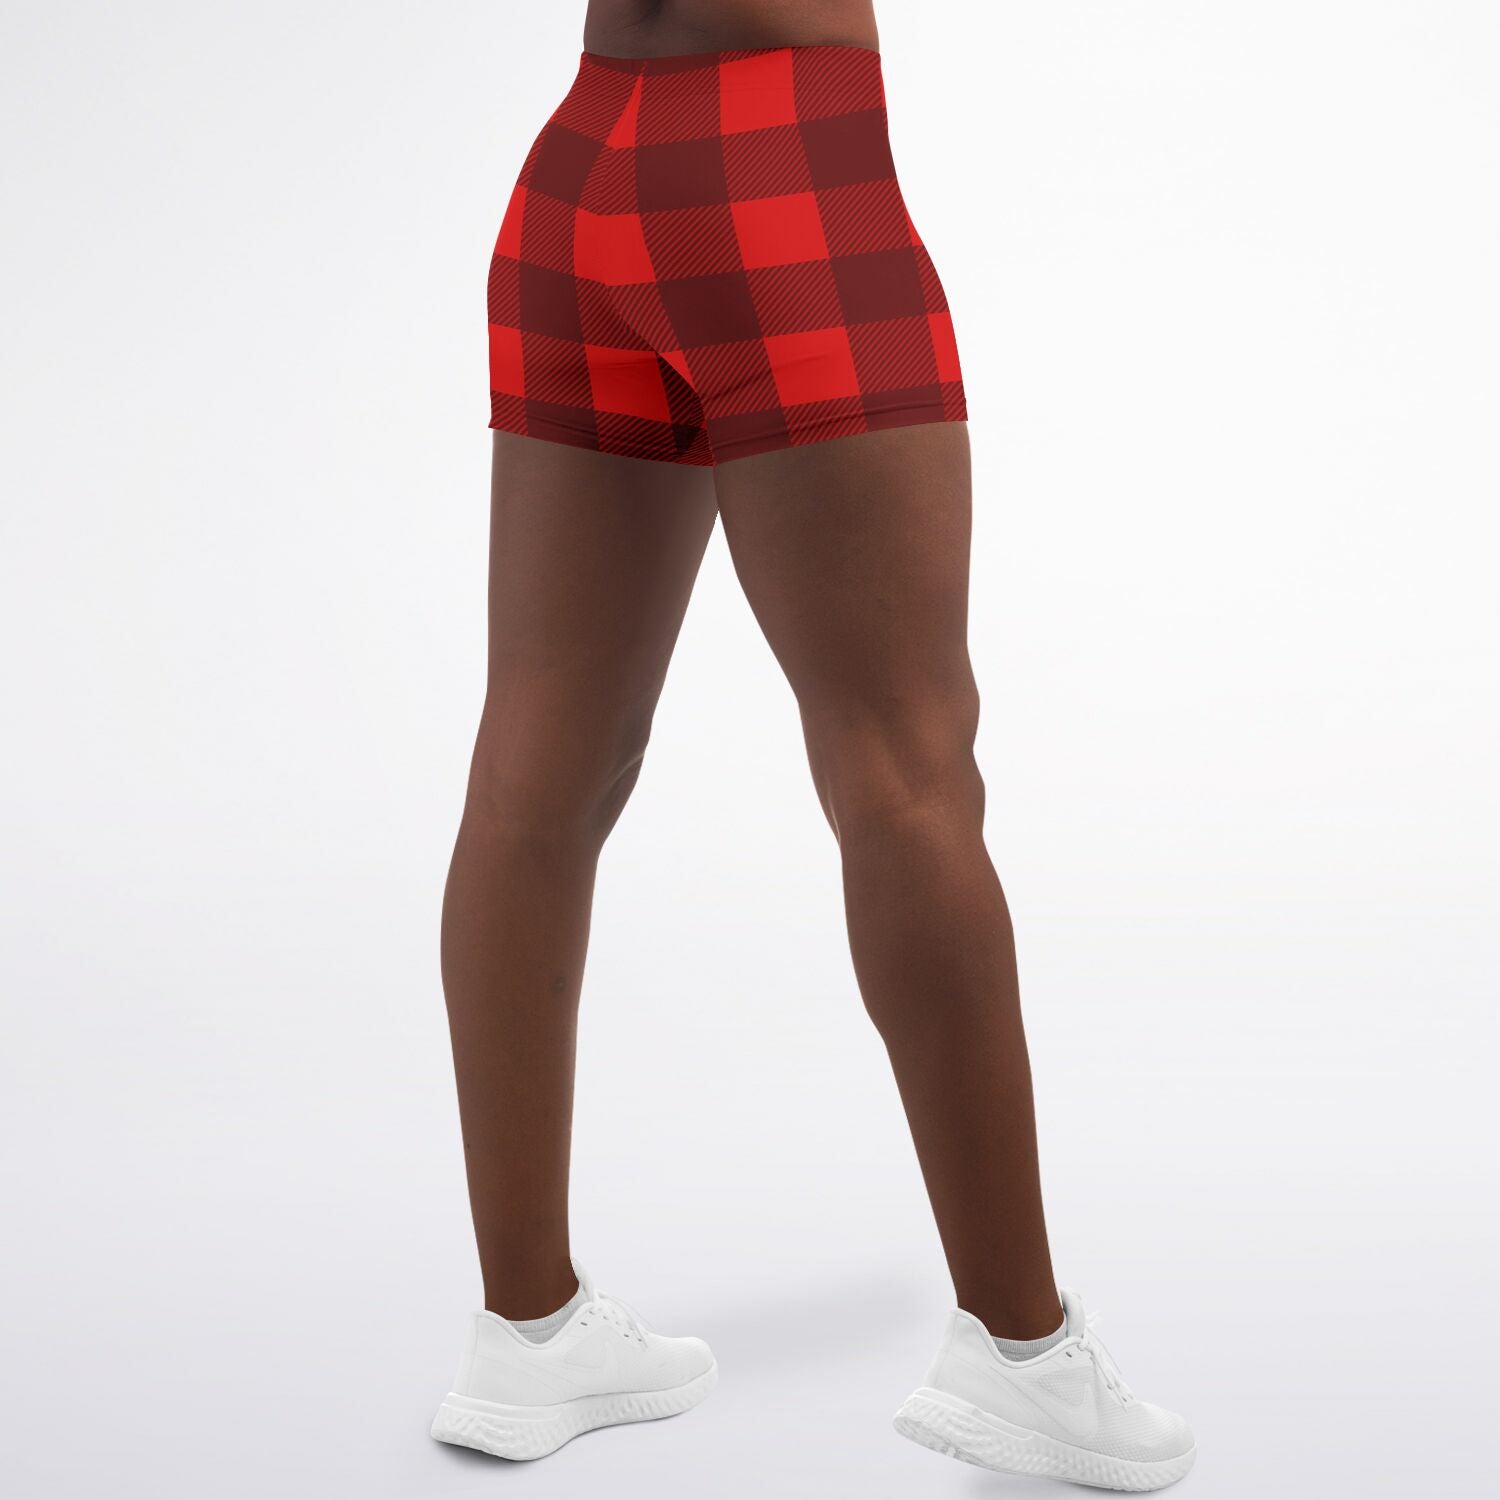 Women's Mid-rise Classic Lumberjack Red Flannel Plaid Athletic Booty Shorts